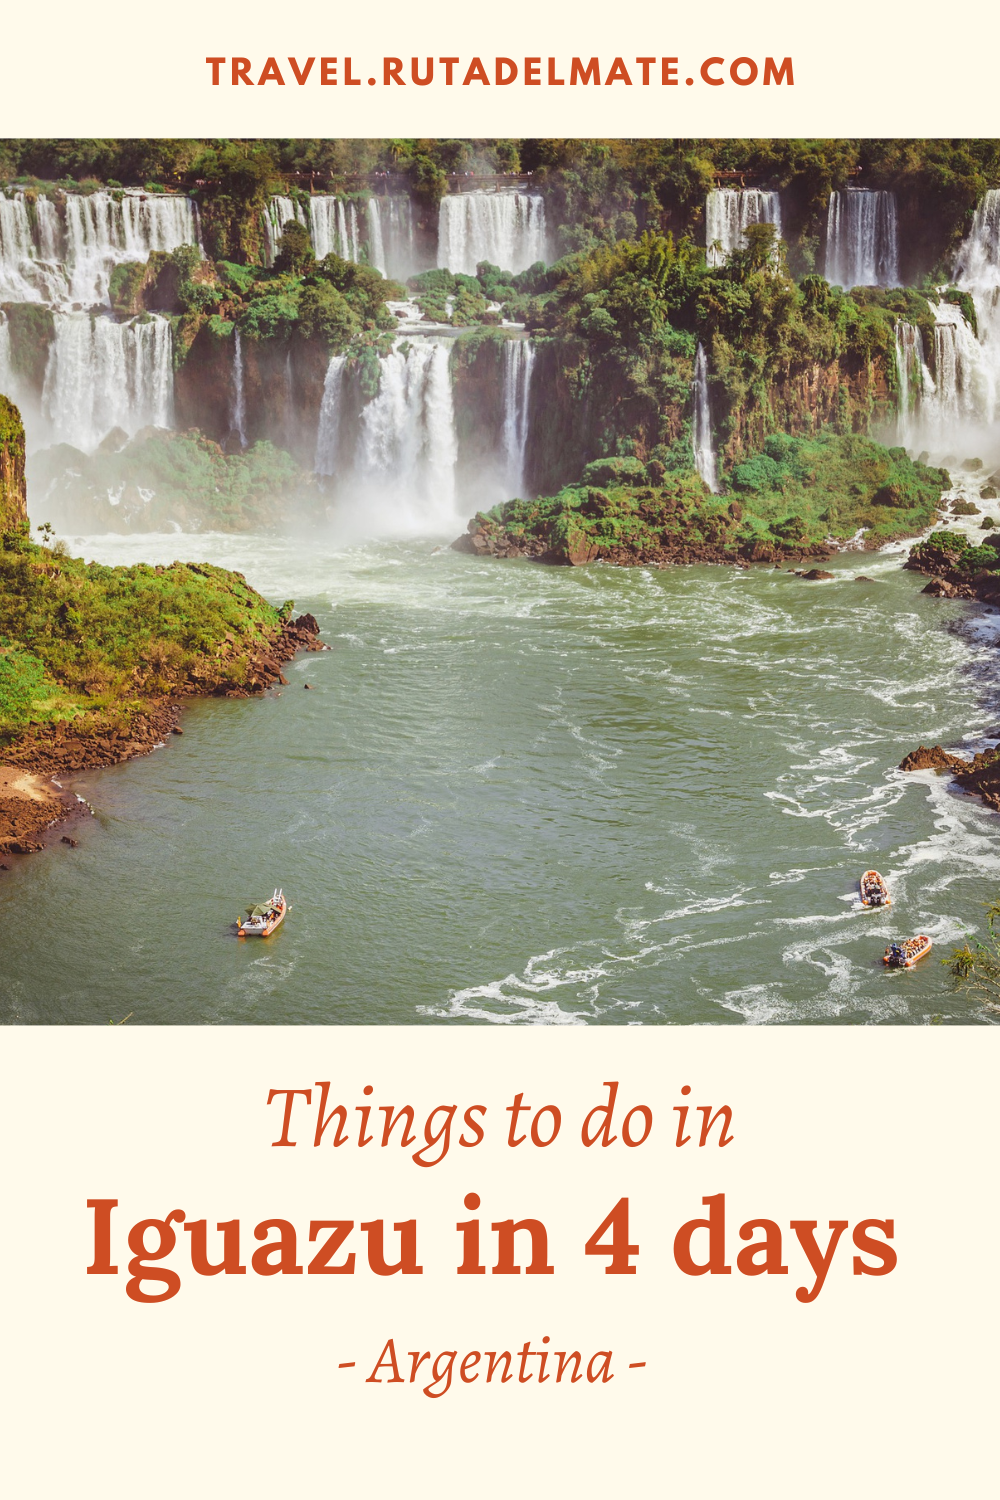 Things to do in Iguazú in 4 days